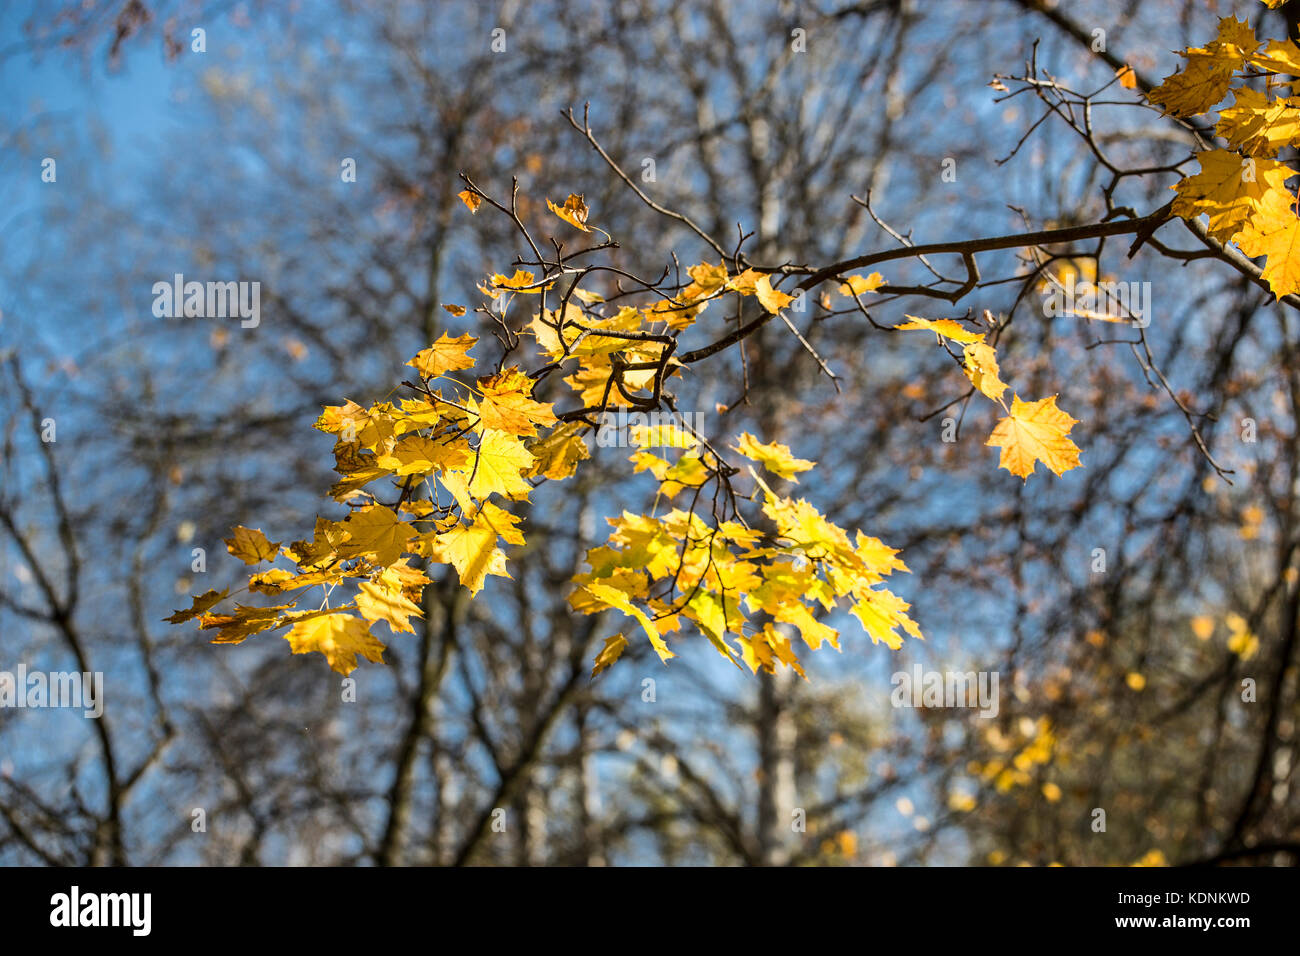 Abstract autumn background with maple leaves. Stock Photo